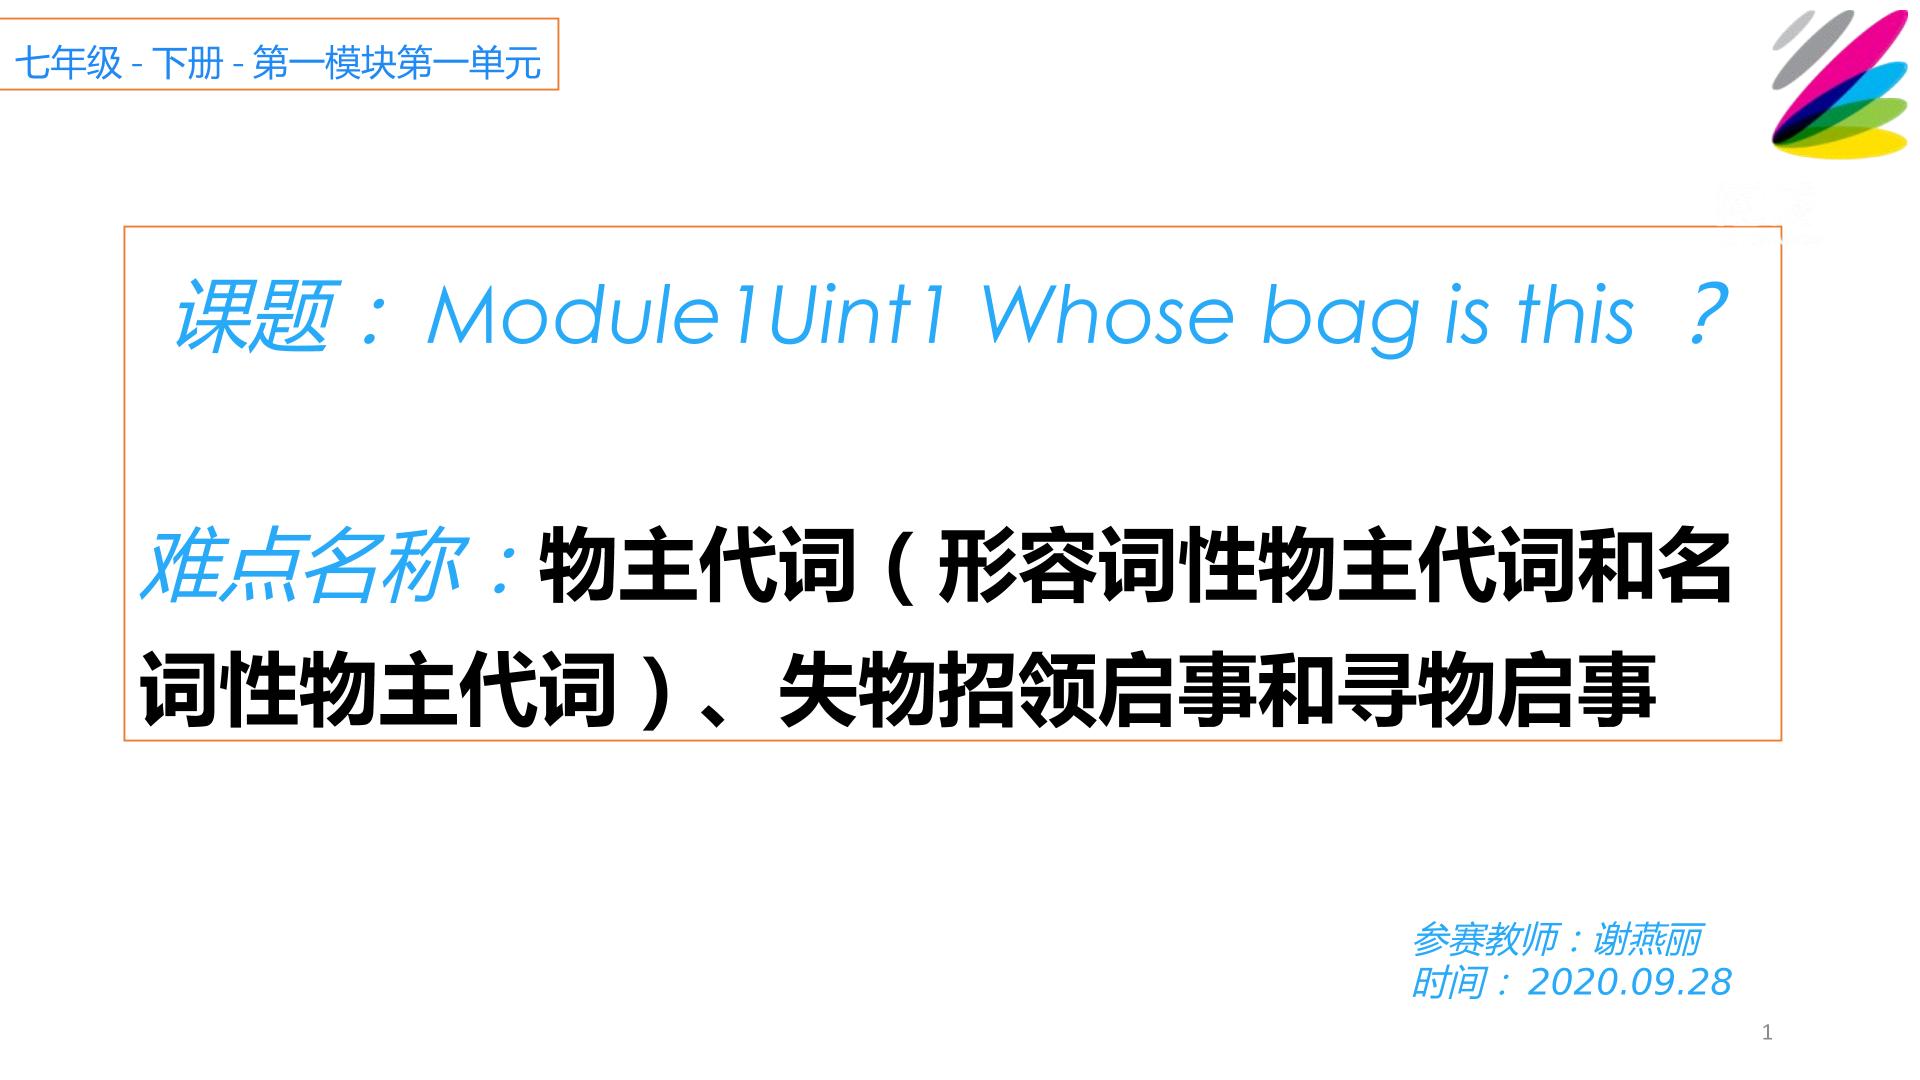 Module1 Uint1 Whose bag is this?